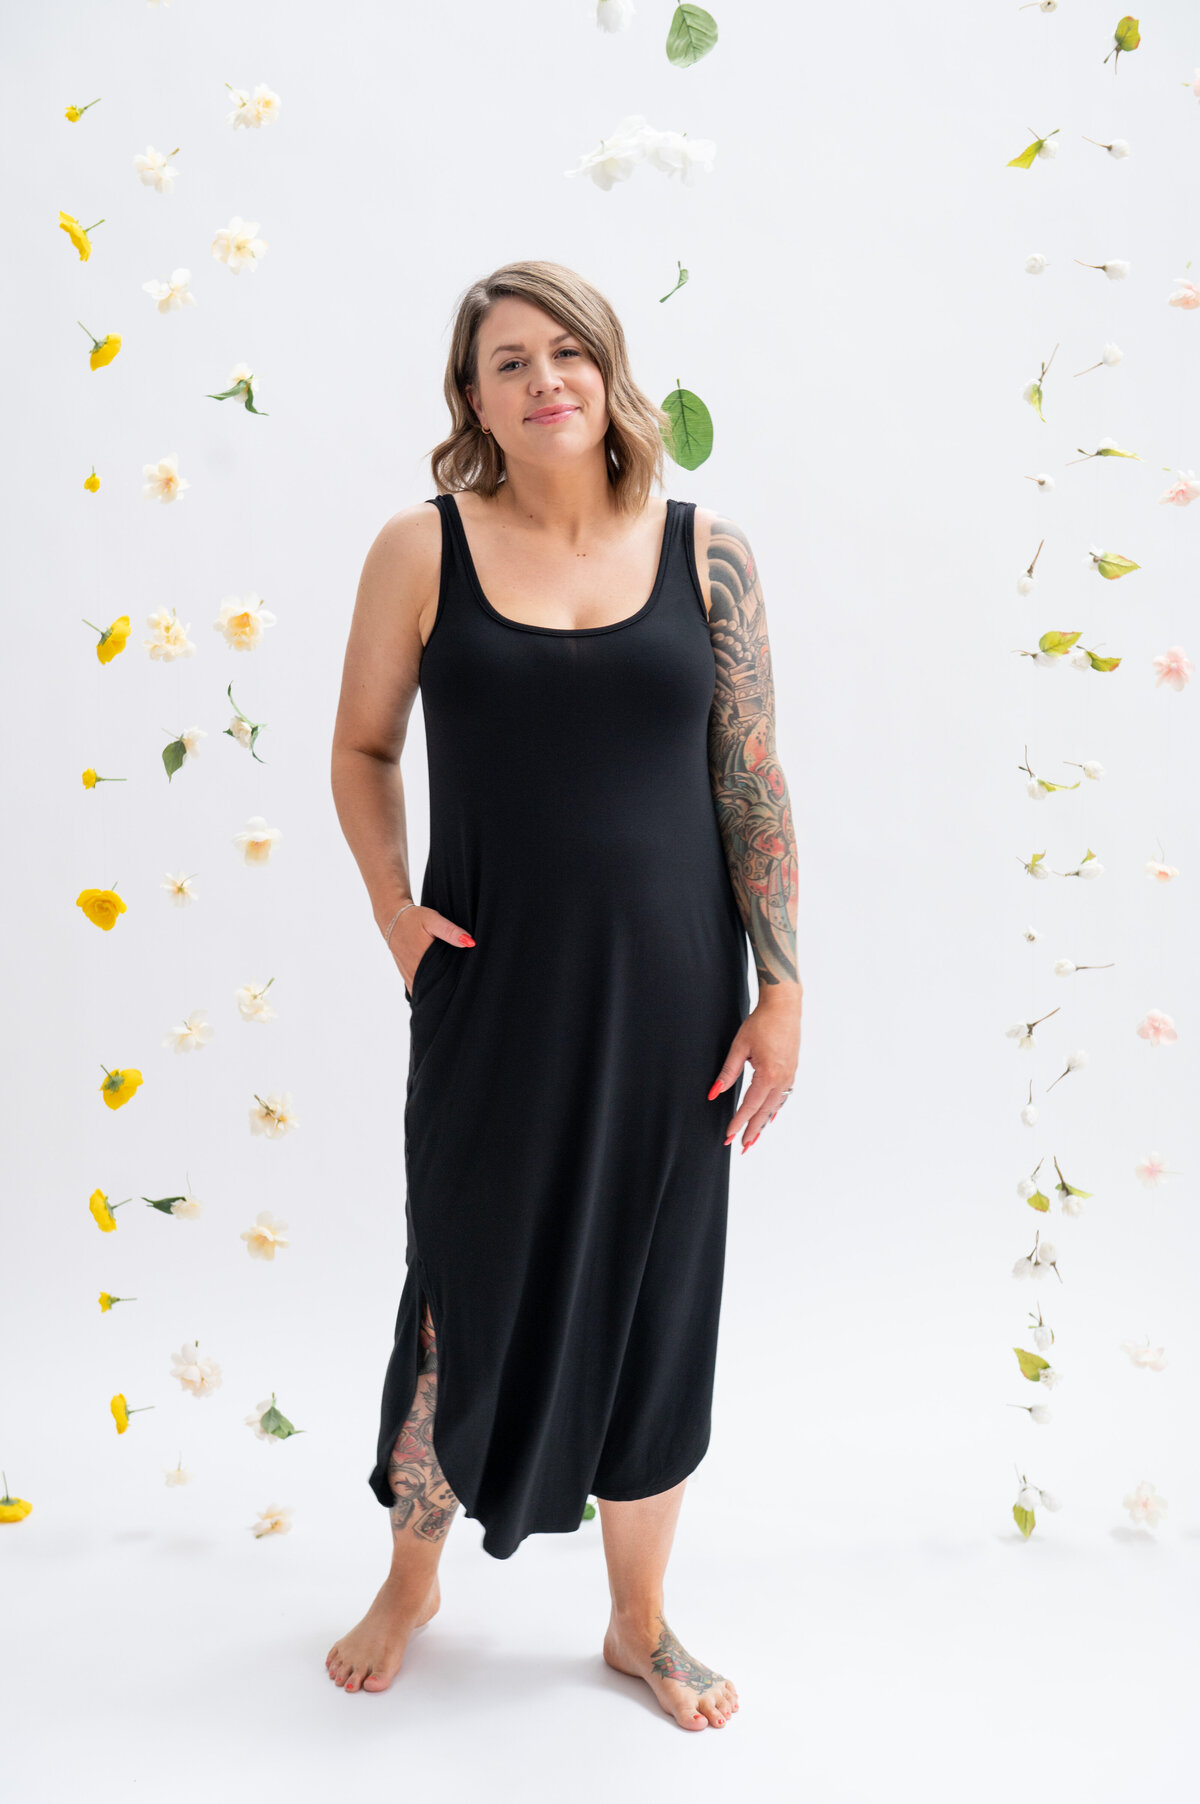 Listing photo of a woman wearing a black maxi dresses on a flower backdrop